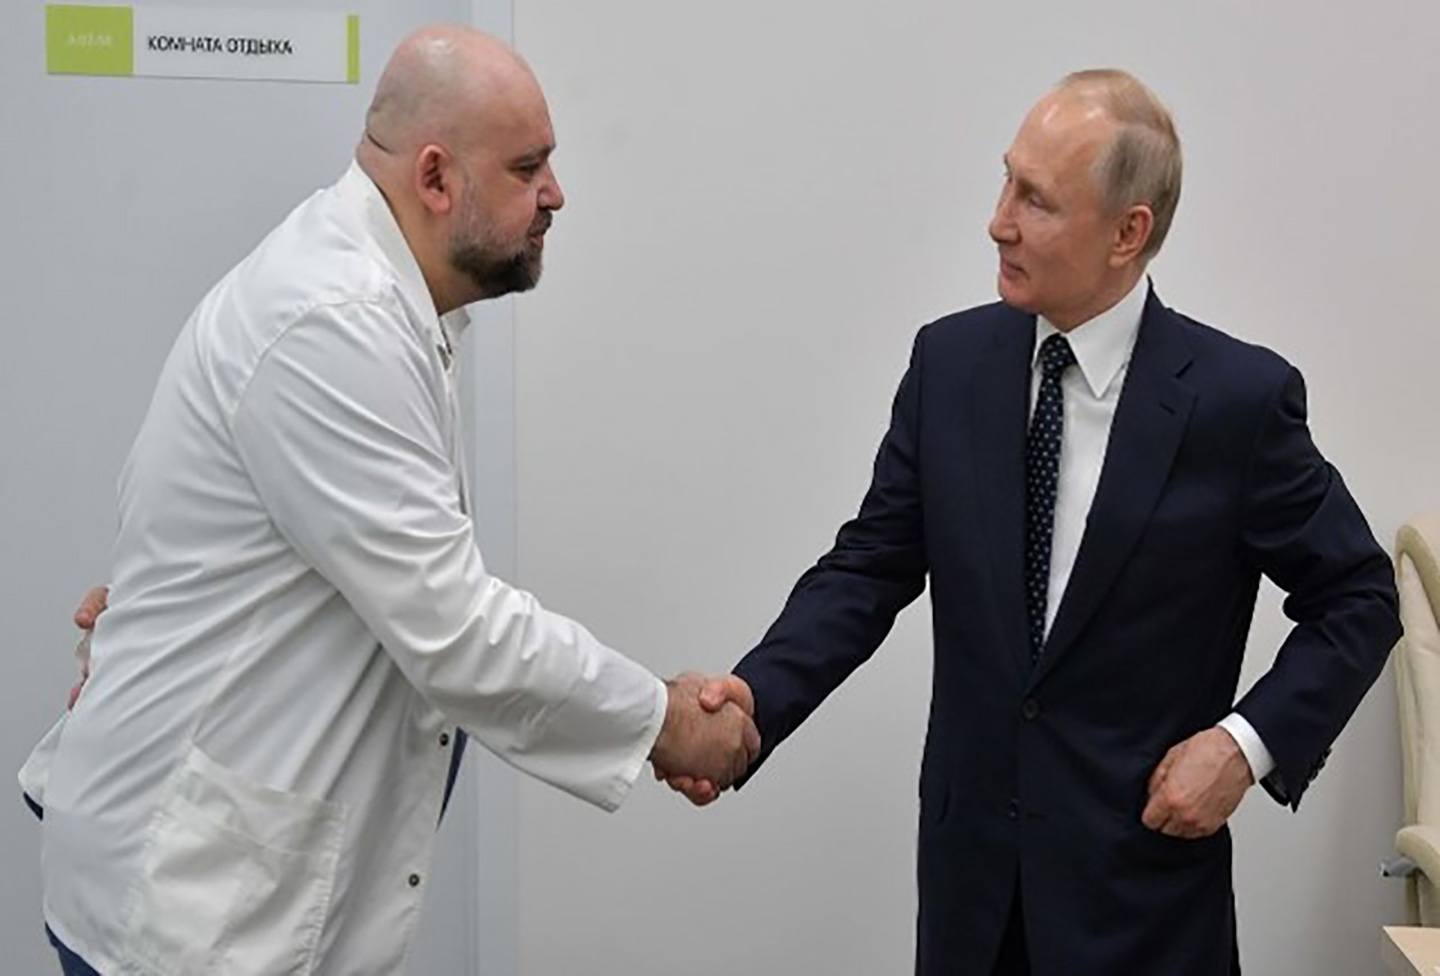 A photograph of Russian President Vladimir Putin shaking hands with the head of Moscow's new hospital treating coronavirus patients during his visit to Kommunarka hospital in Moscow, Russia.